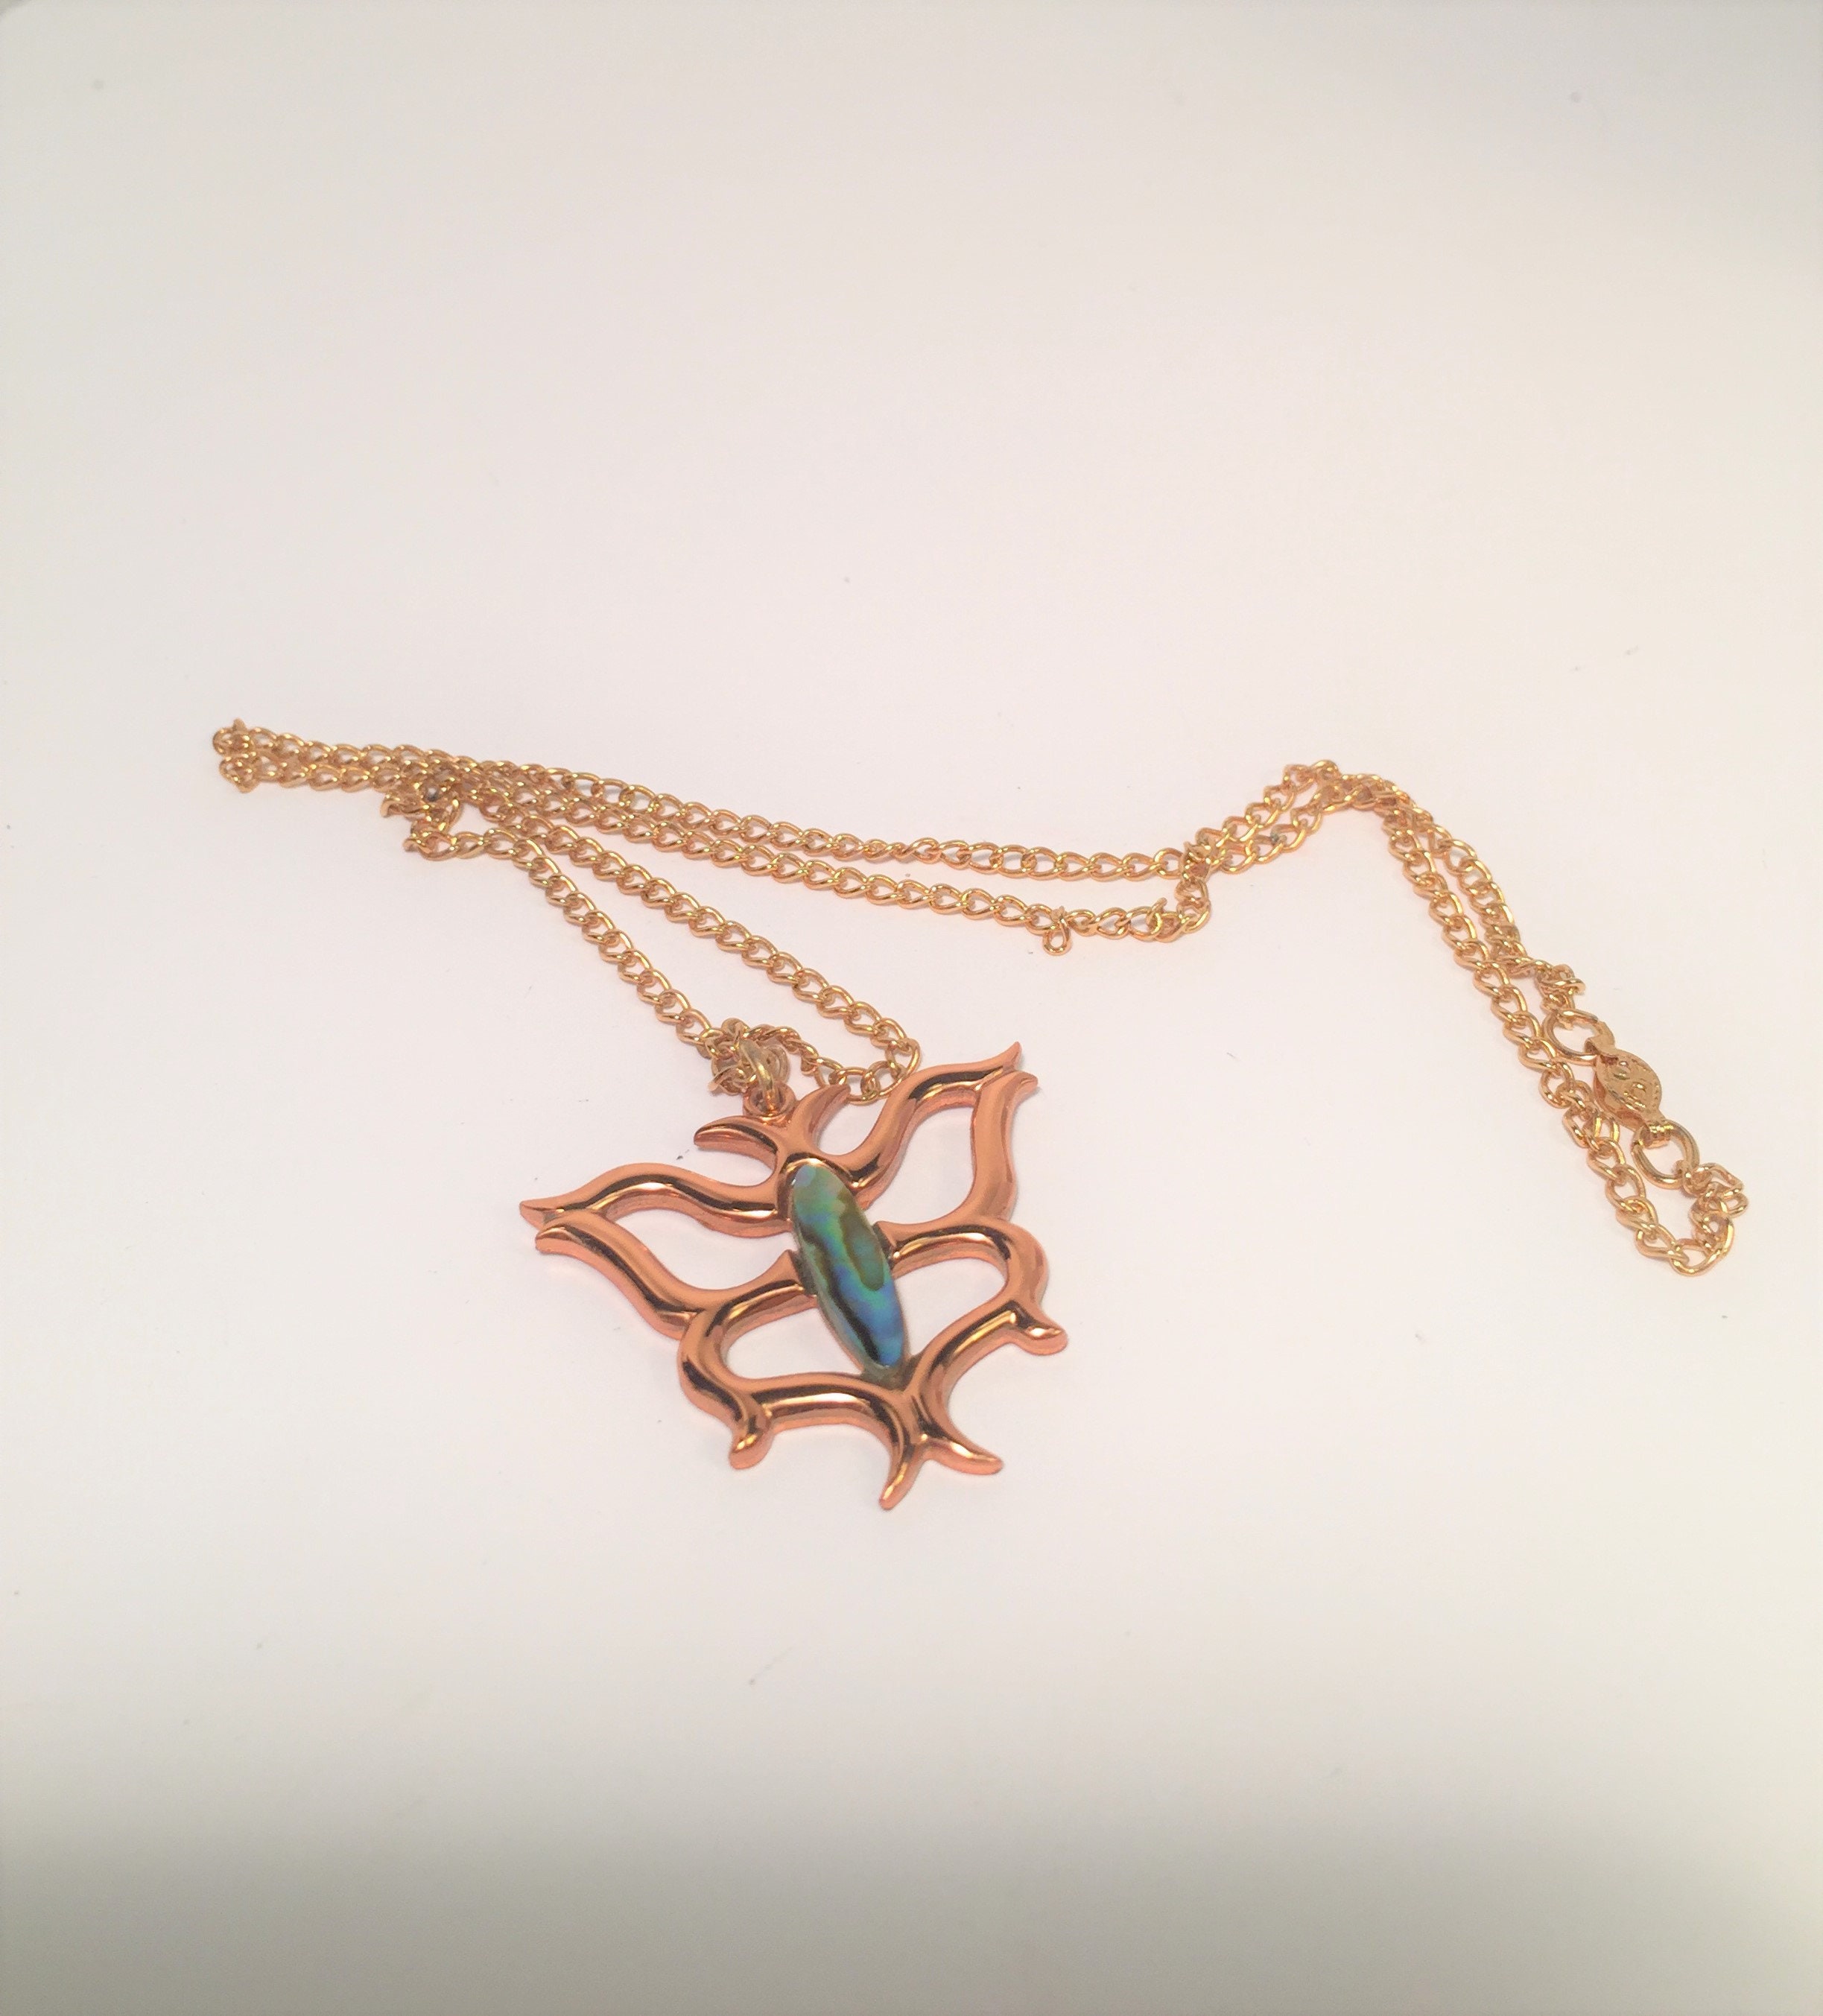 Coppercraft Guild Copper and Aqua Mother of Pearl Necklace